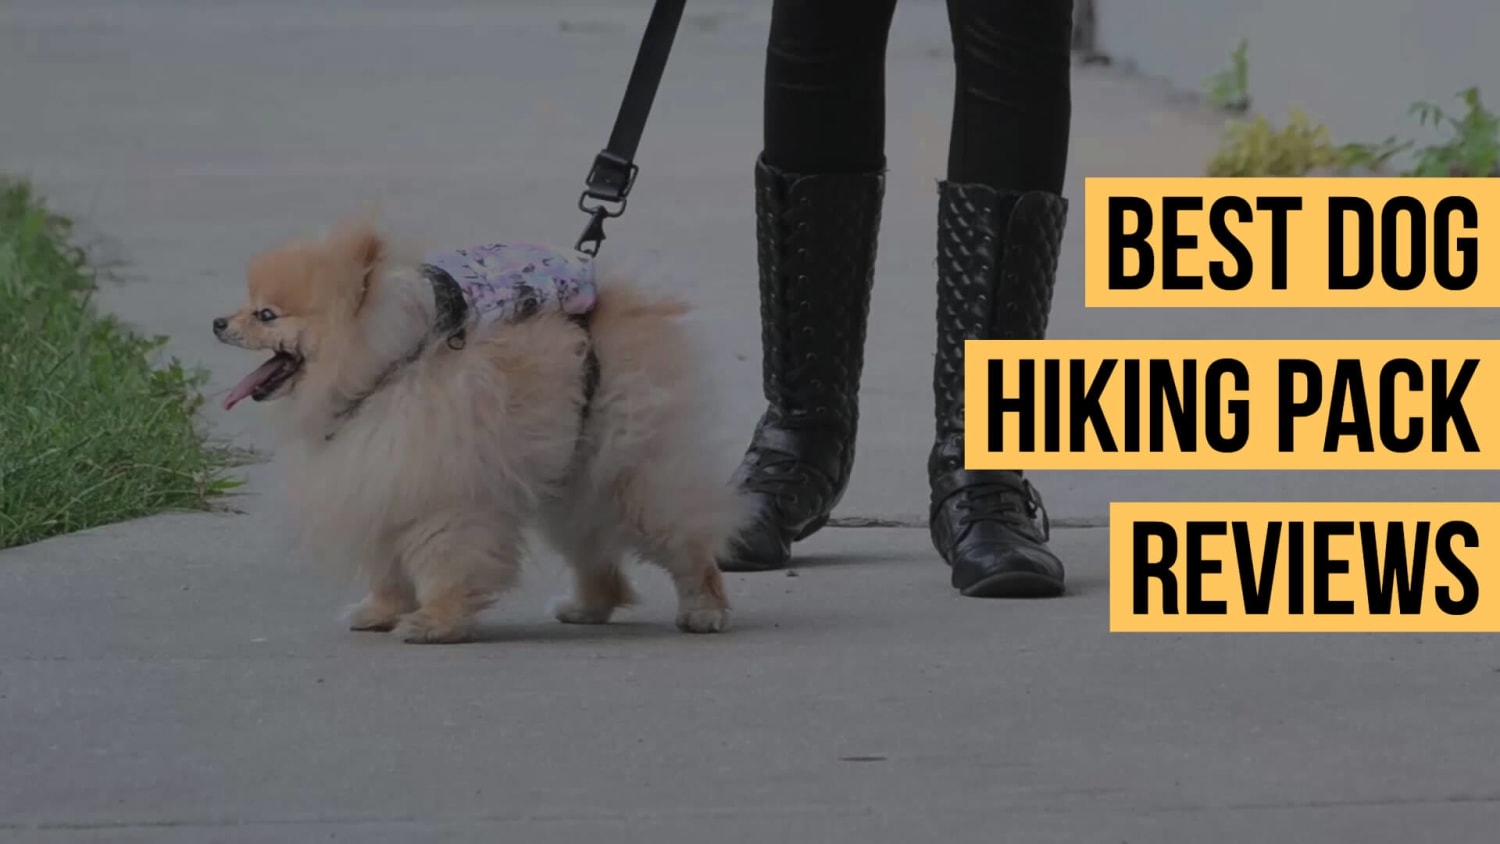 The 10 Best Dog Hiking Pack to Buy In 2020